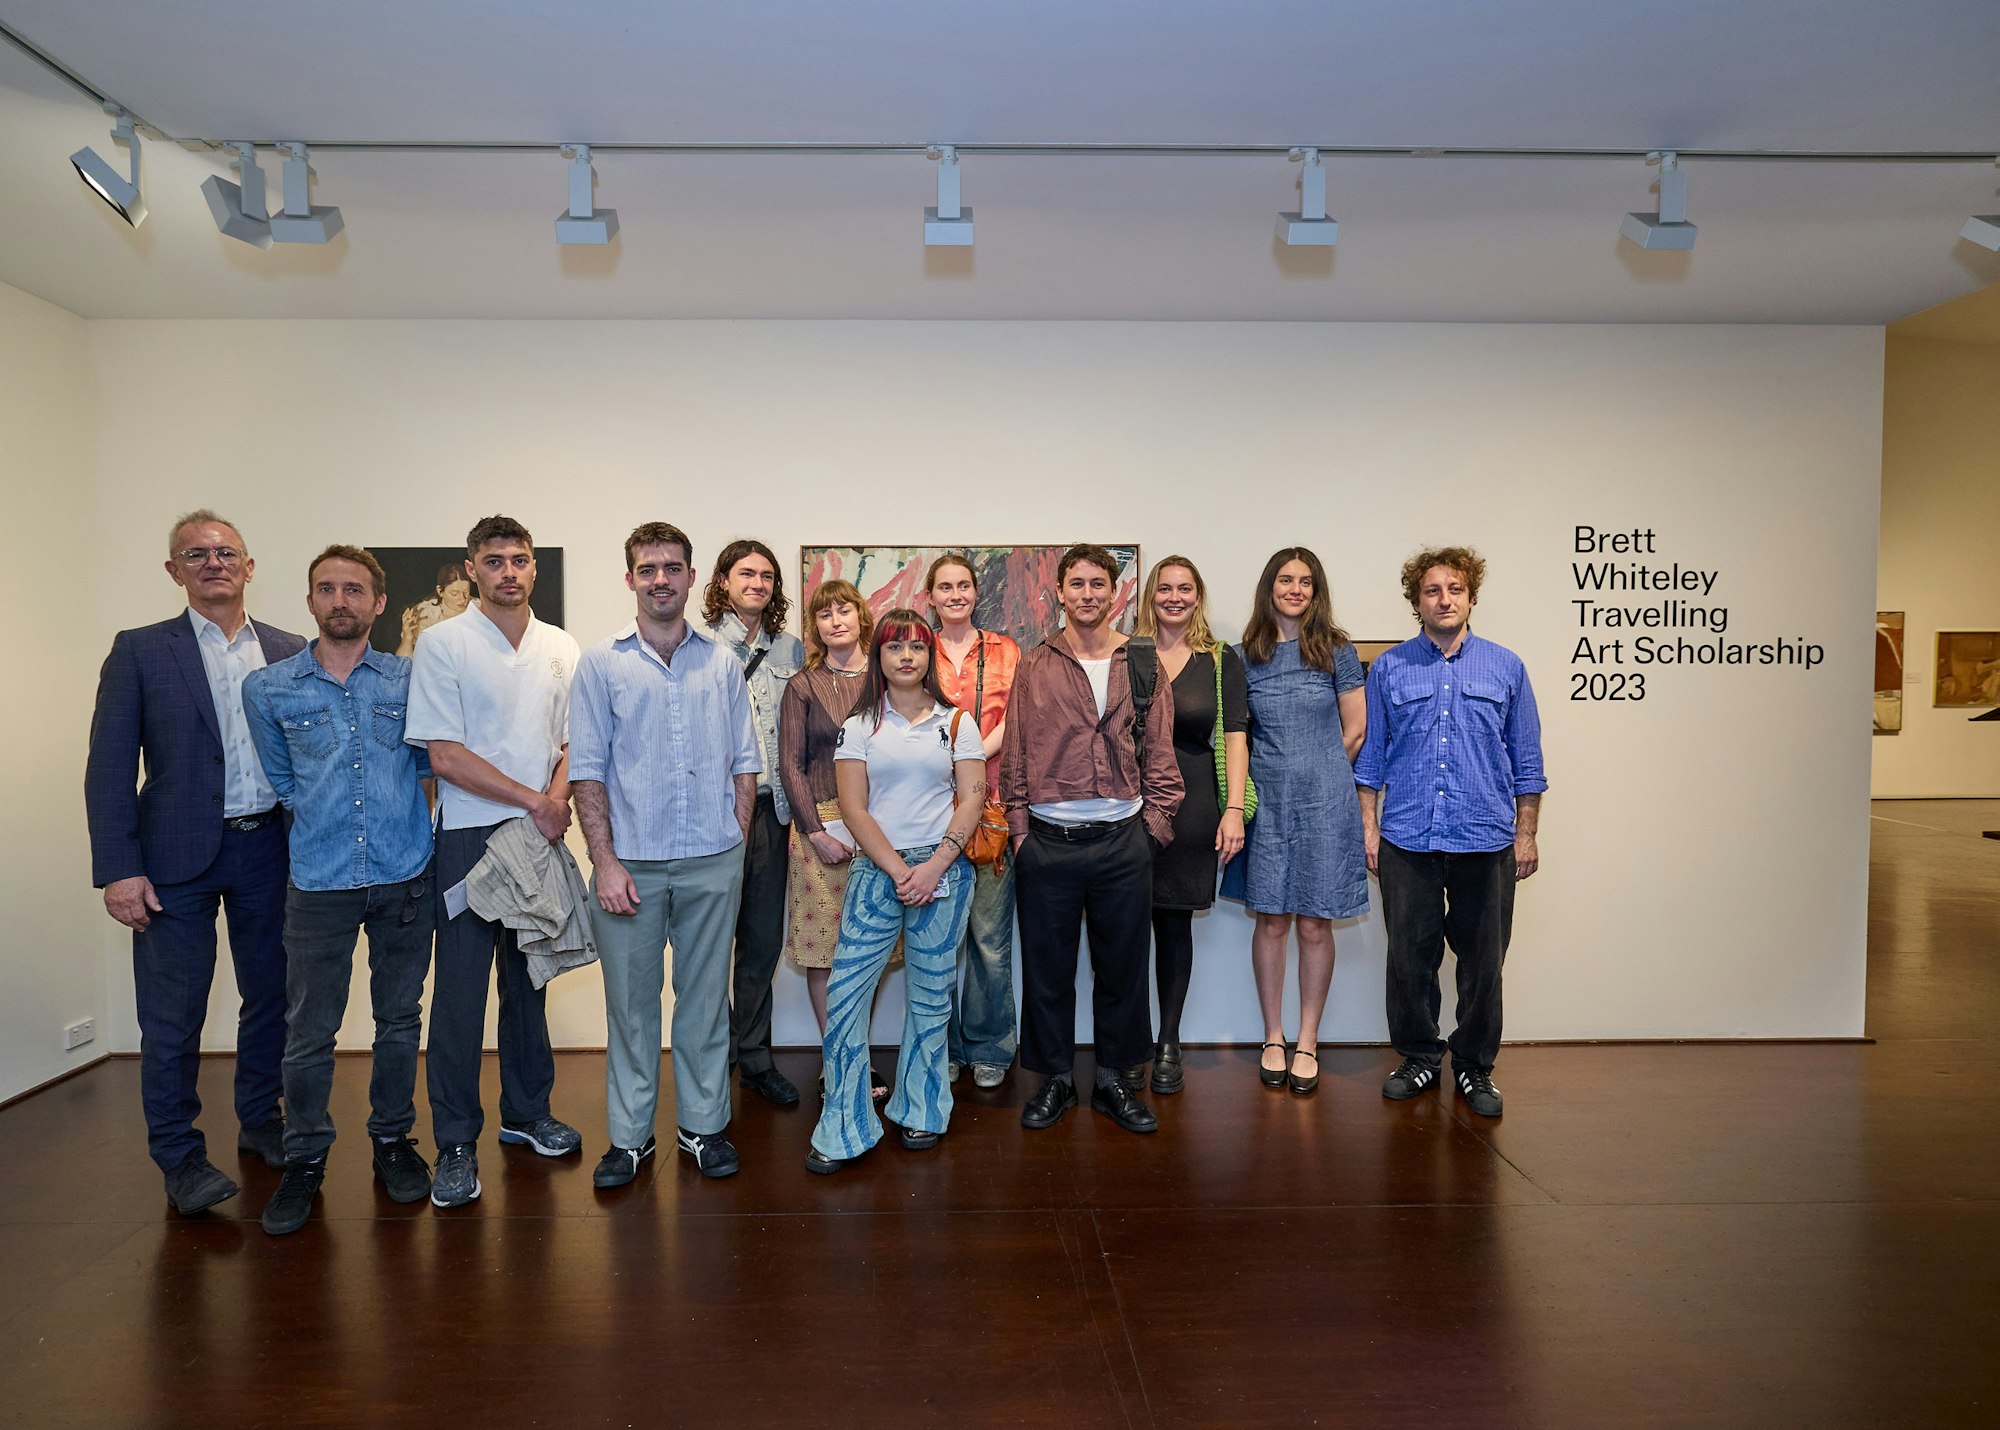 Left to right: Art Gallery of New South Wales director Michael Brand, artist and 2023 scholarship judge Guido Maestri and Brett Whiteley Travelling Art Scholarship 2023 recipients and finalists